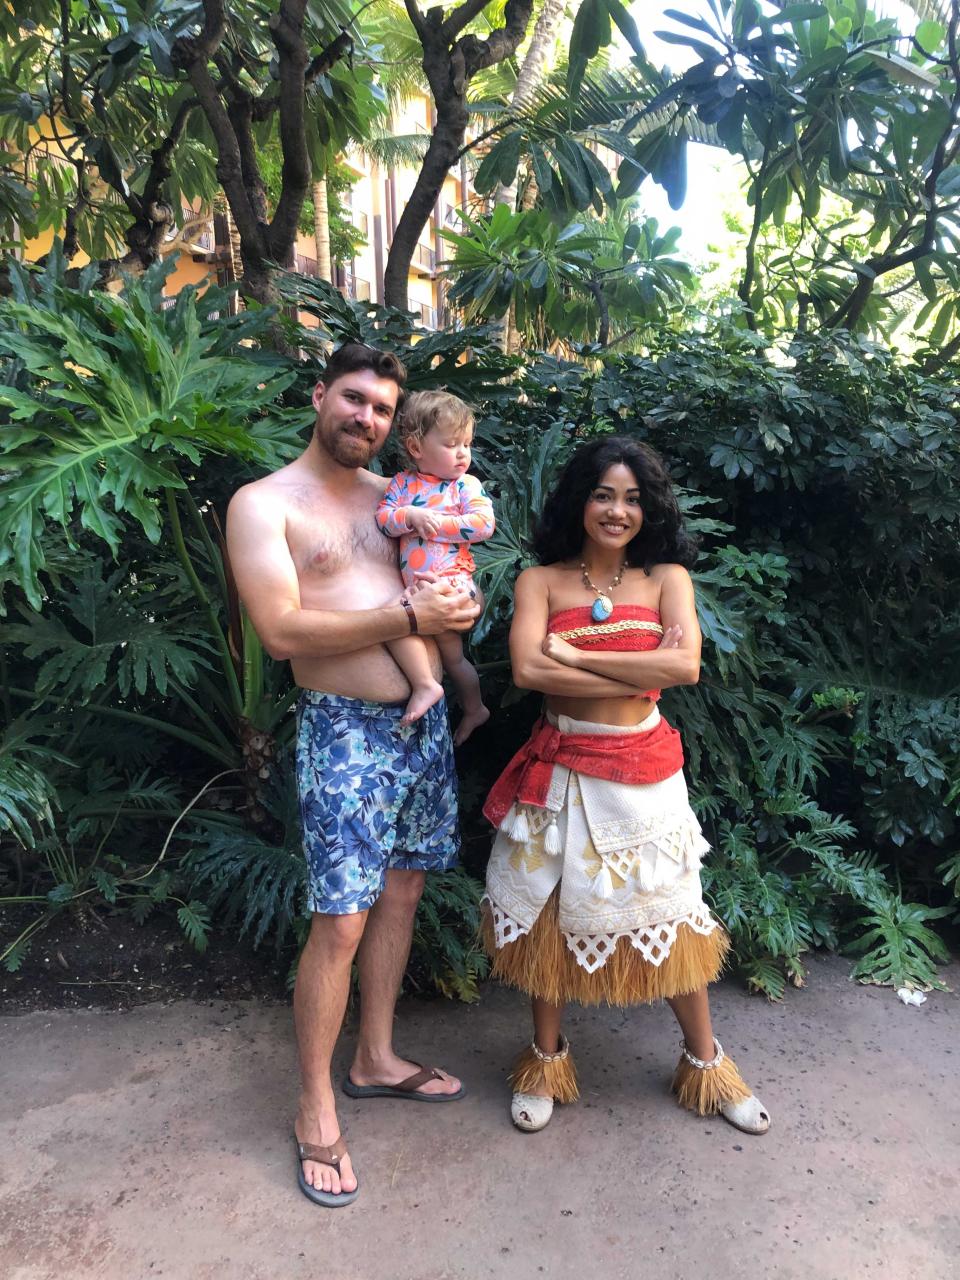 A man holding his baby posing with the Disney character, Moana.